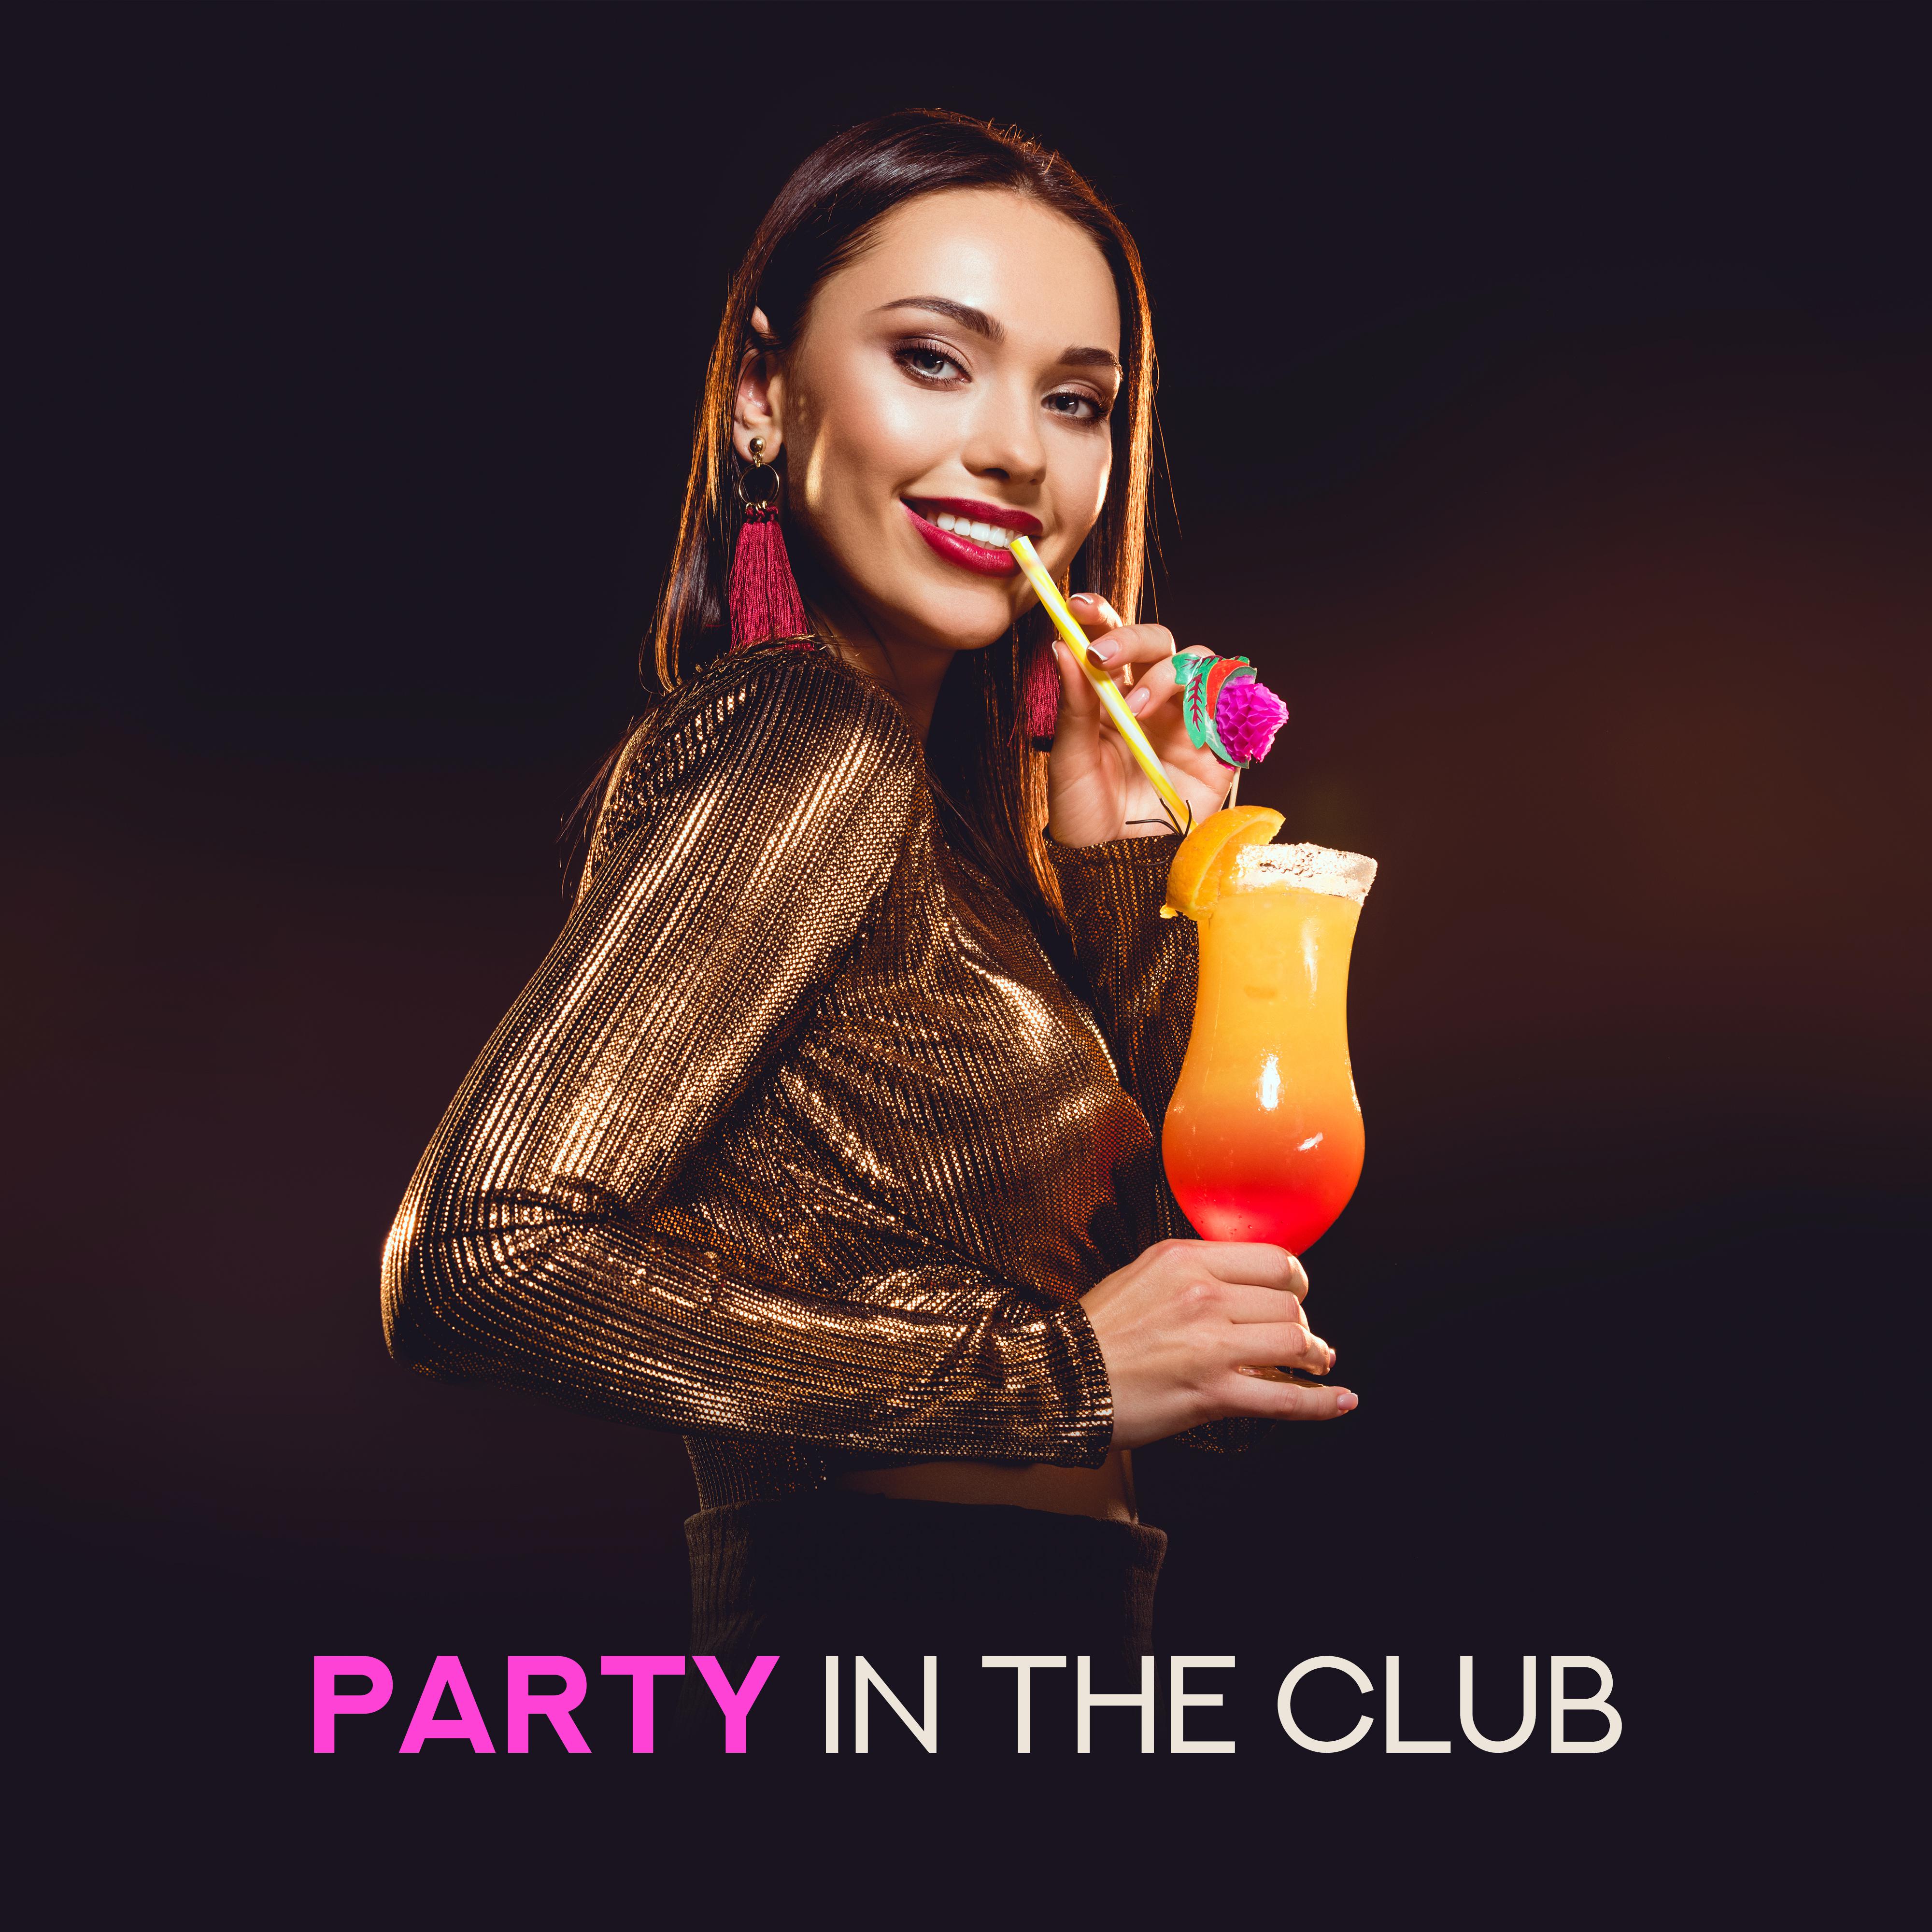 Party in the Club – Music for Dancing, Partying and Revelry